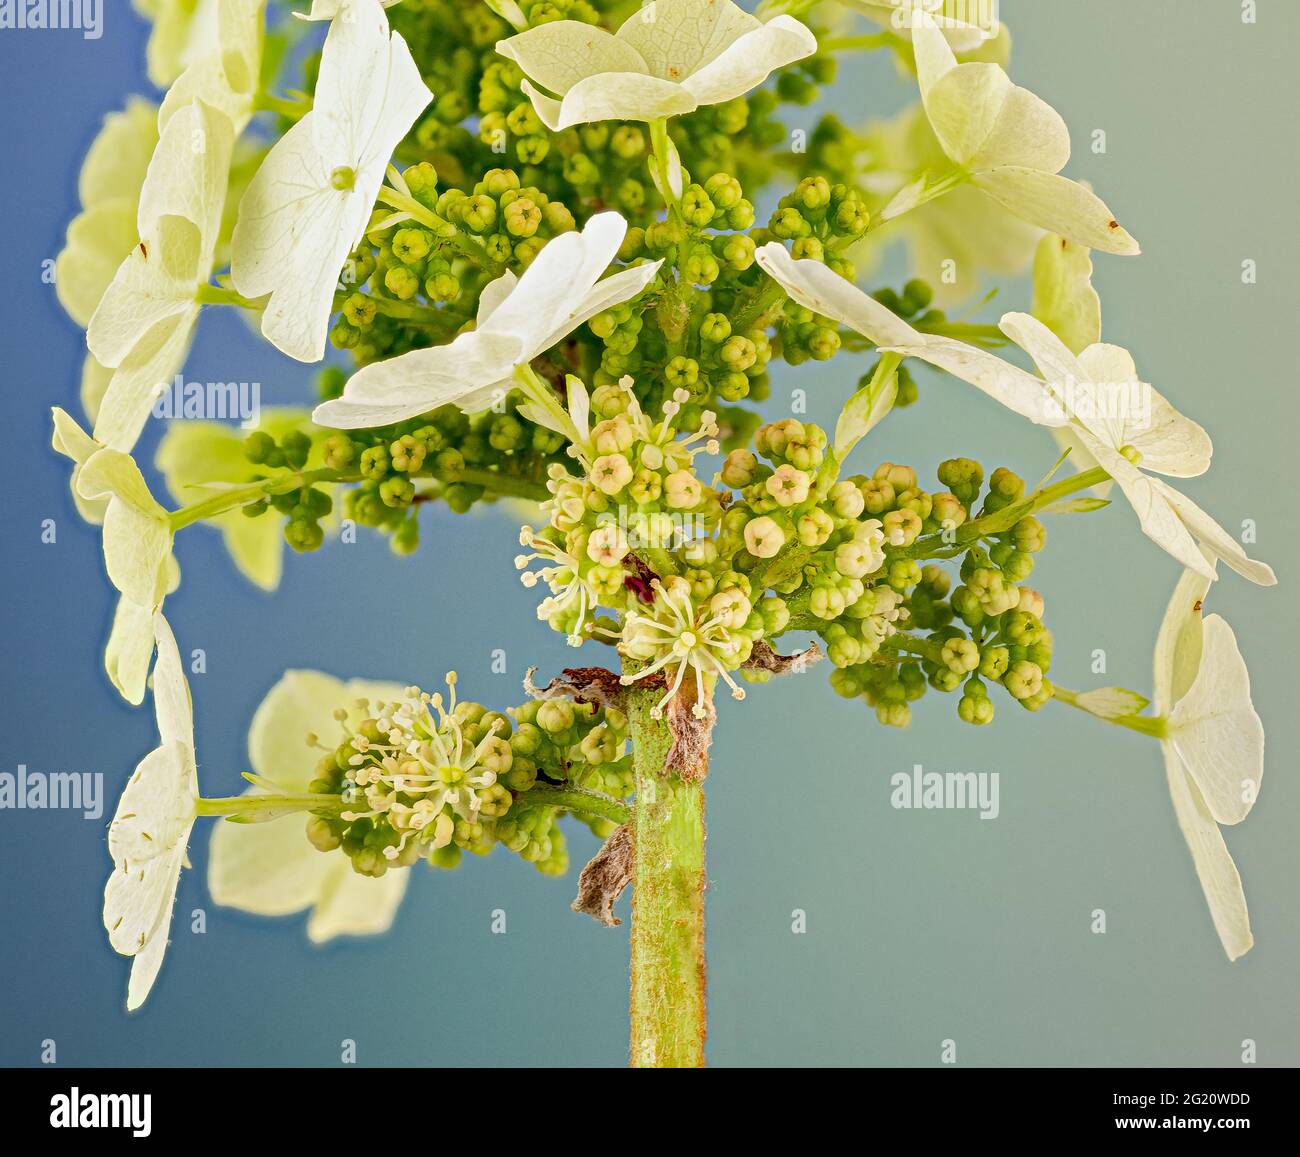 Large sterile flowers (sepals) of oakleaf hydrangea (Hydrangea quercifolia) attract insects to the inconspicuous fertile flowers underneath. Stock Photo